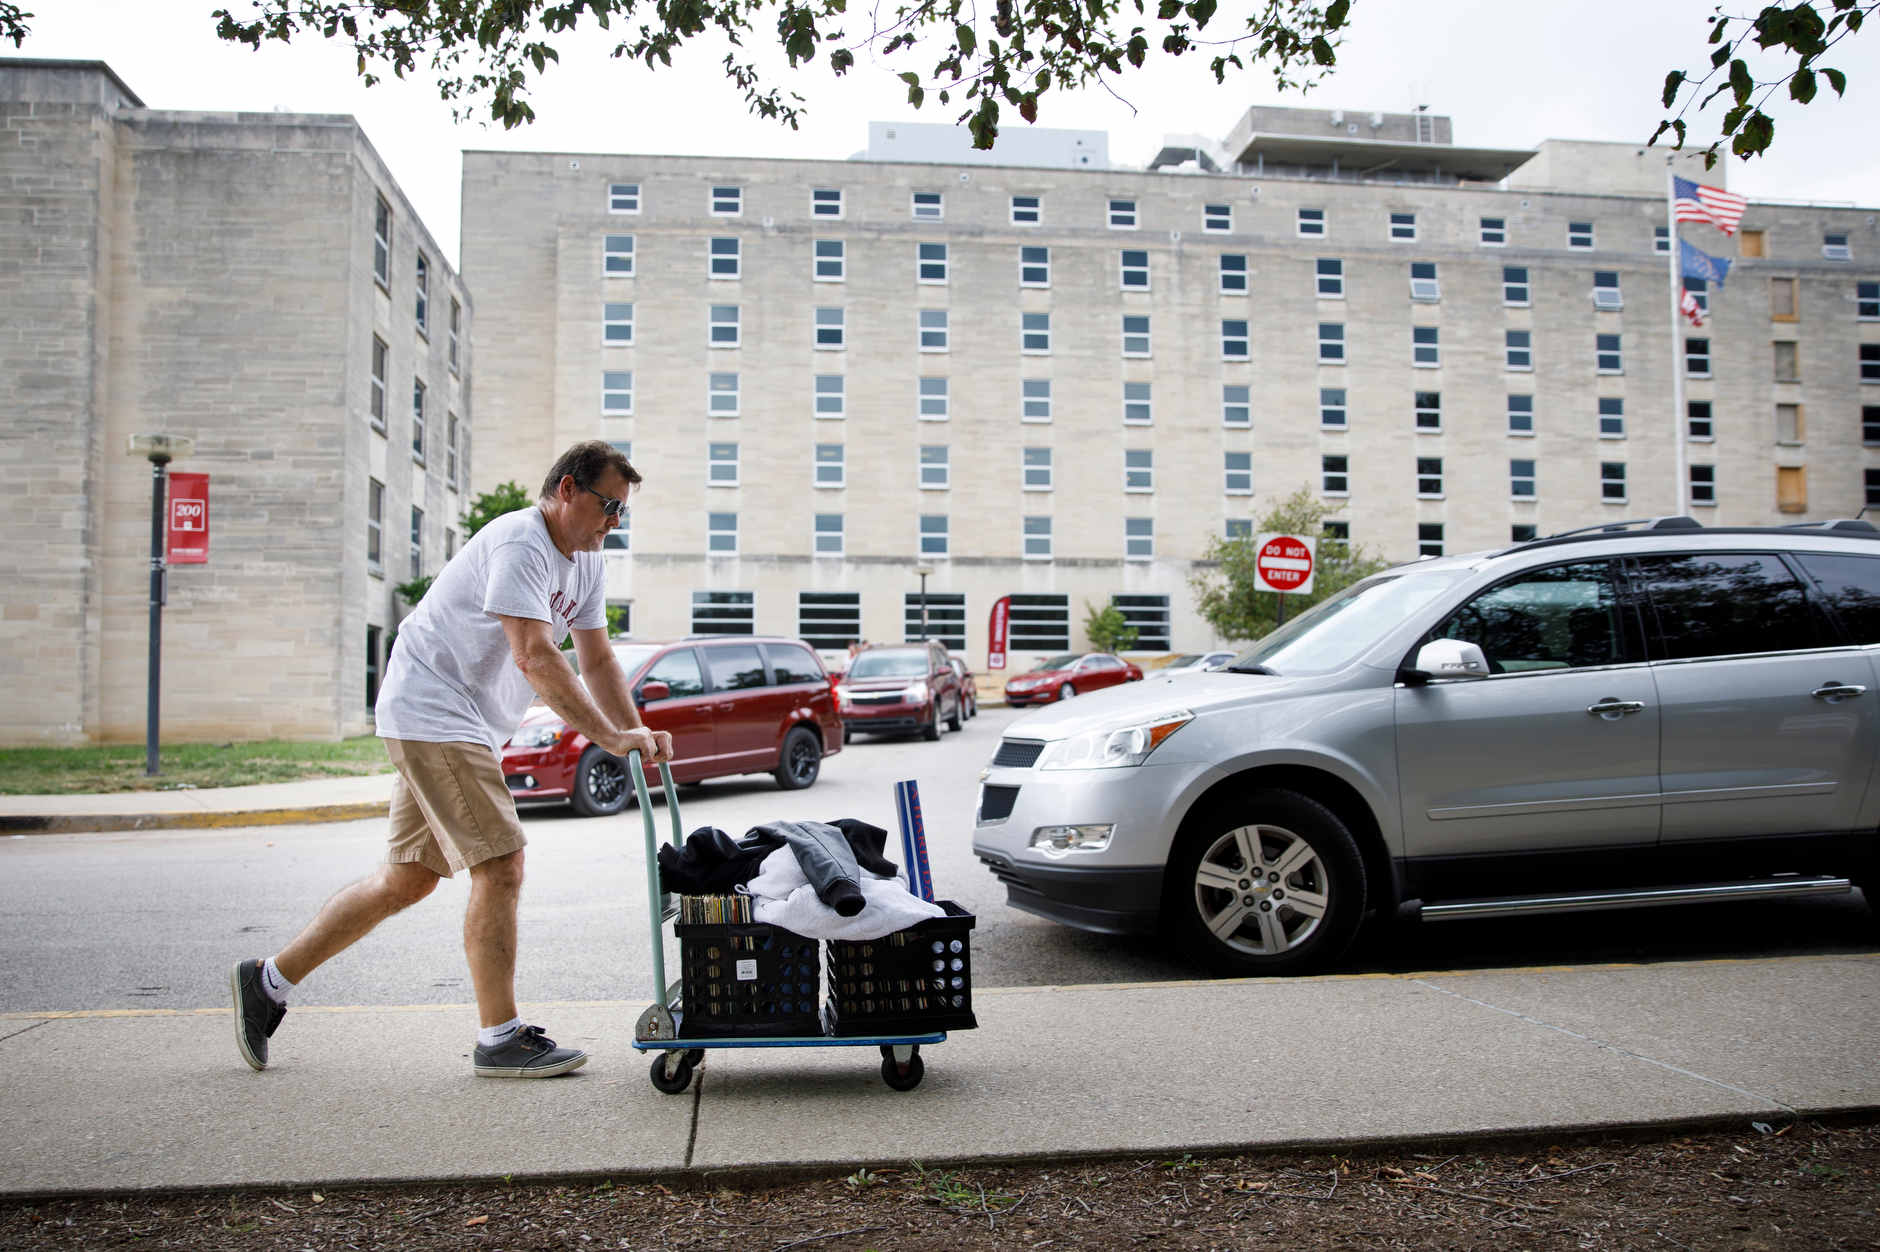 A student's belongings are wheeled past Teter Quad to a room in Ashton Center during IU Bloomington move-in on Tuesday, Aug. 20, 2019. (James Brosher/Indiana University)